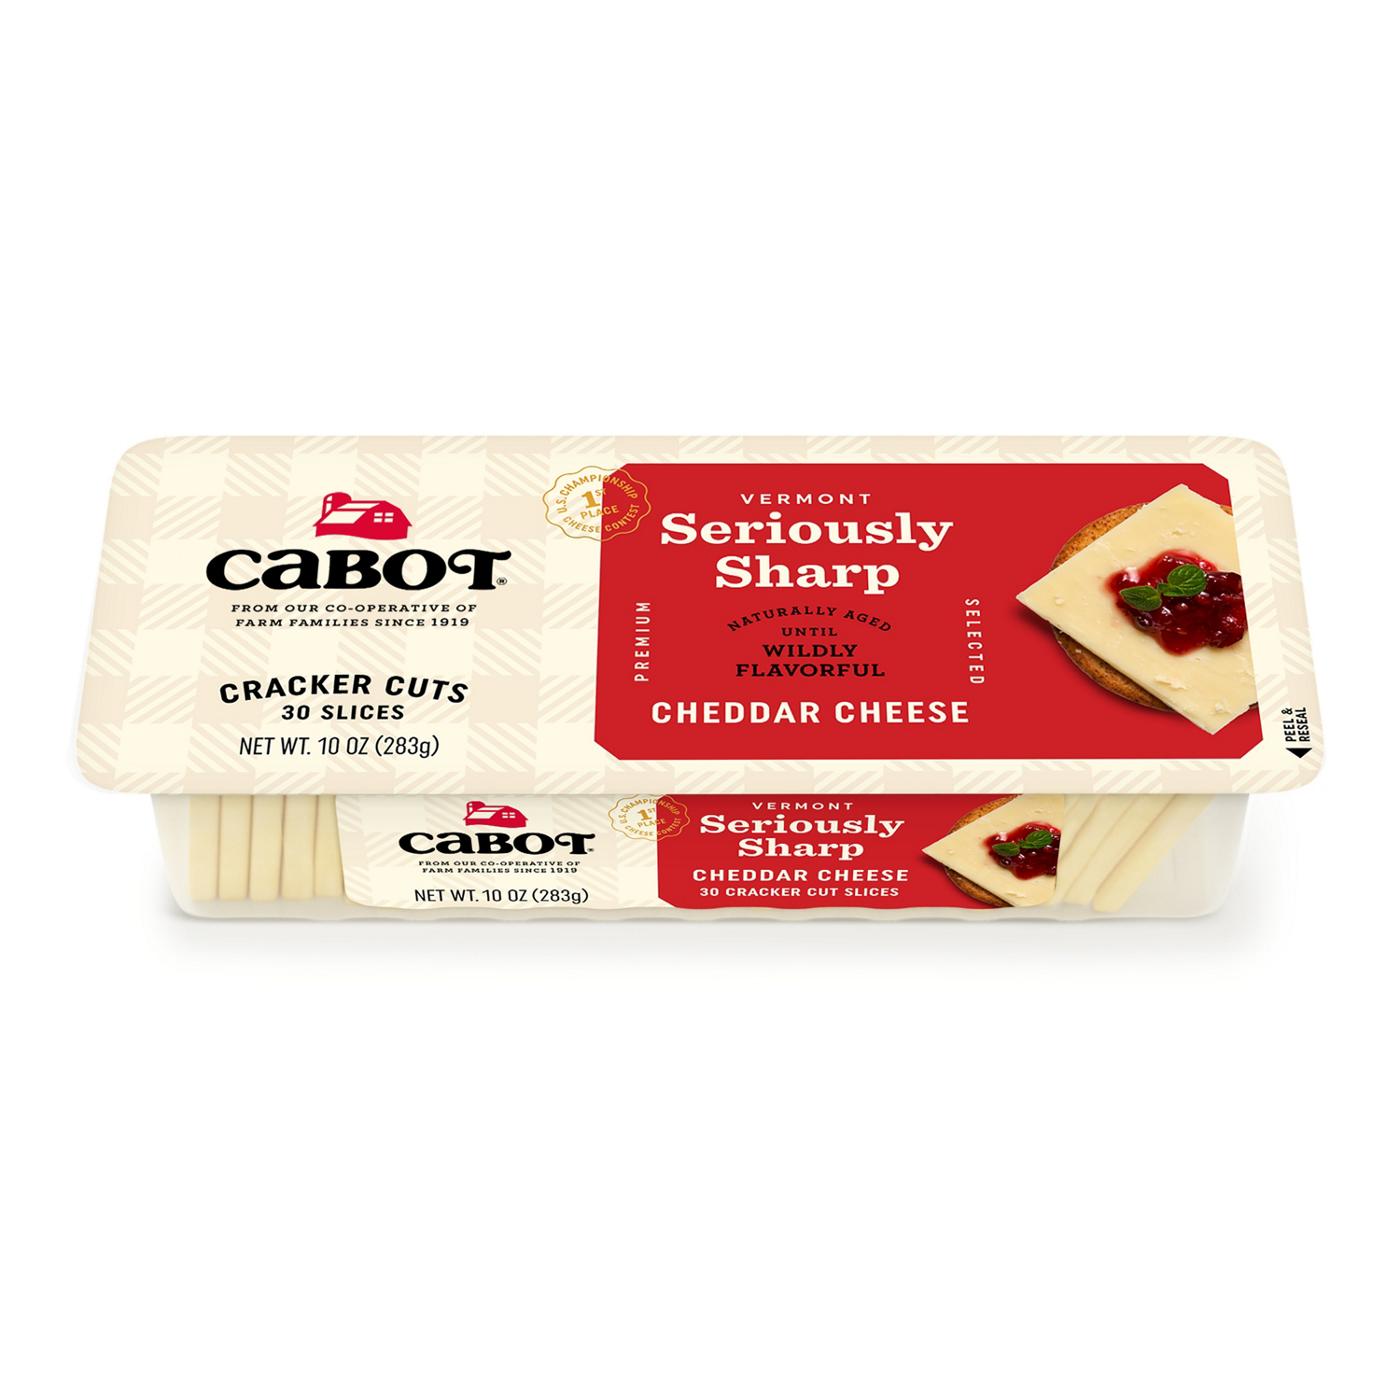 CABOT Vermont Seriously Sharp Cheddar Cracker Cut Cheese; image 1 of 2